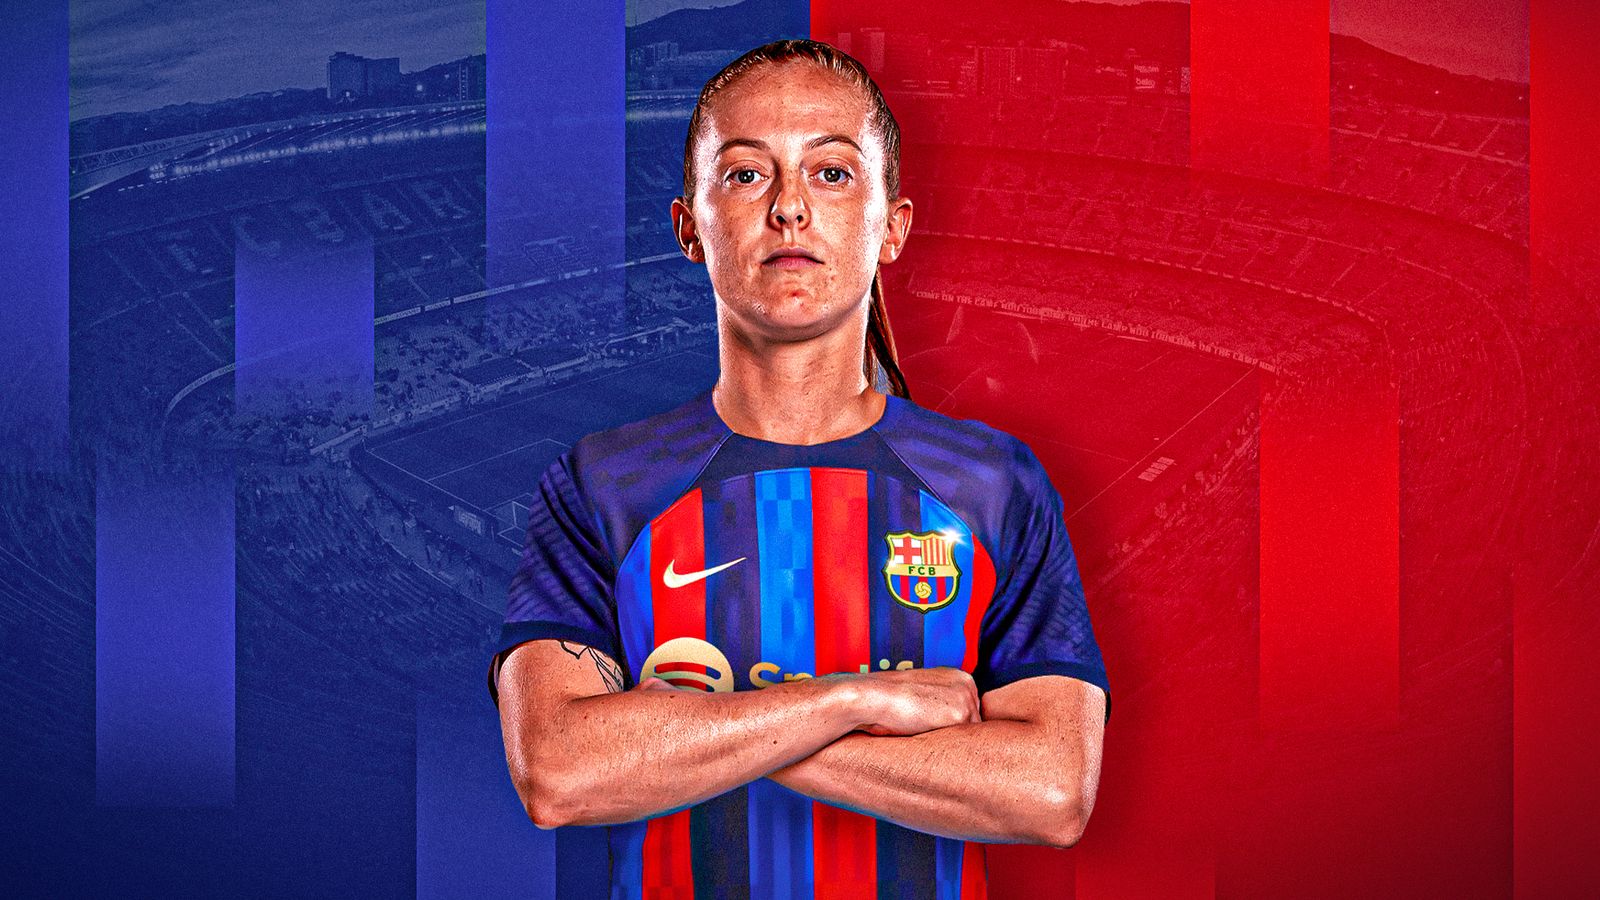 keira-walsh-england-midfielder-joins-barcelona-from-man-city-for-world-record-fee